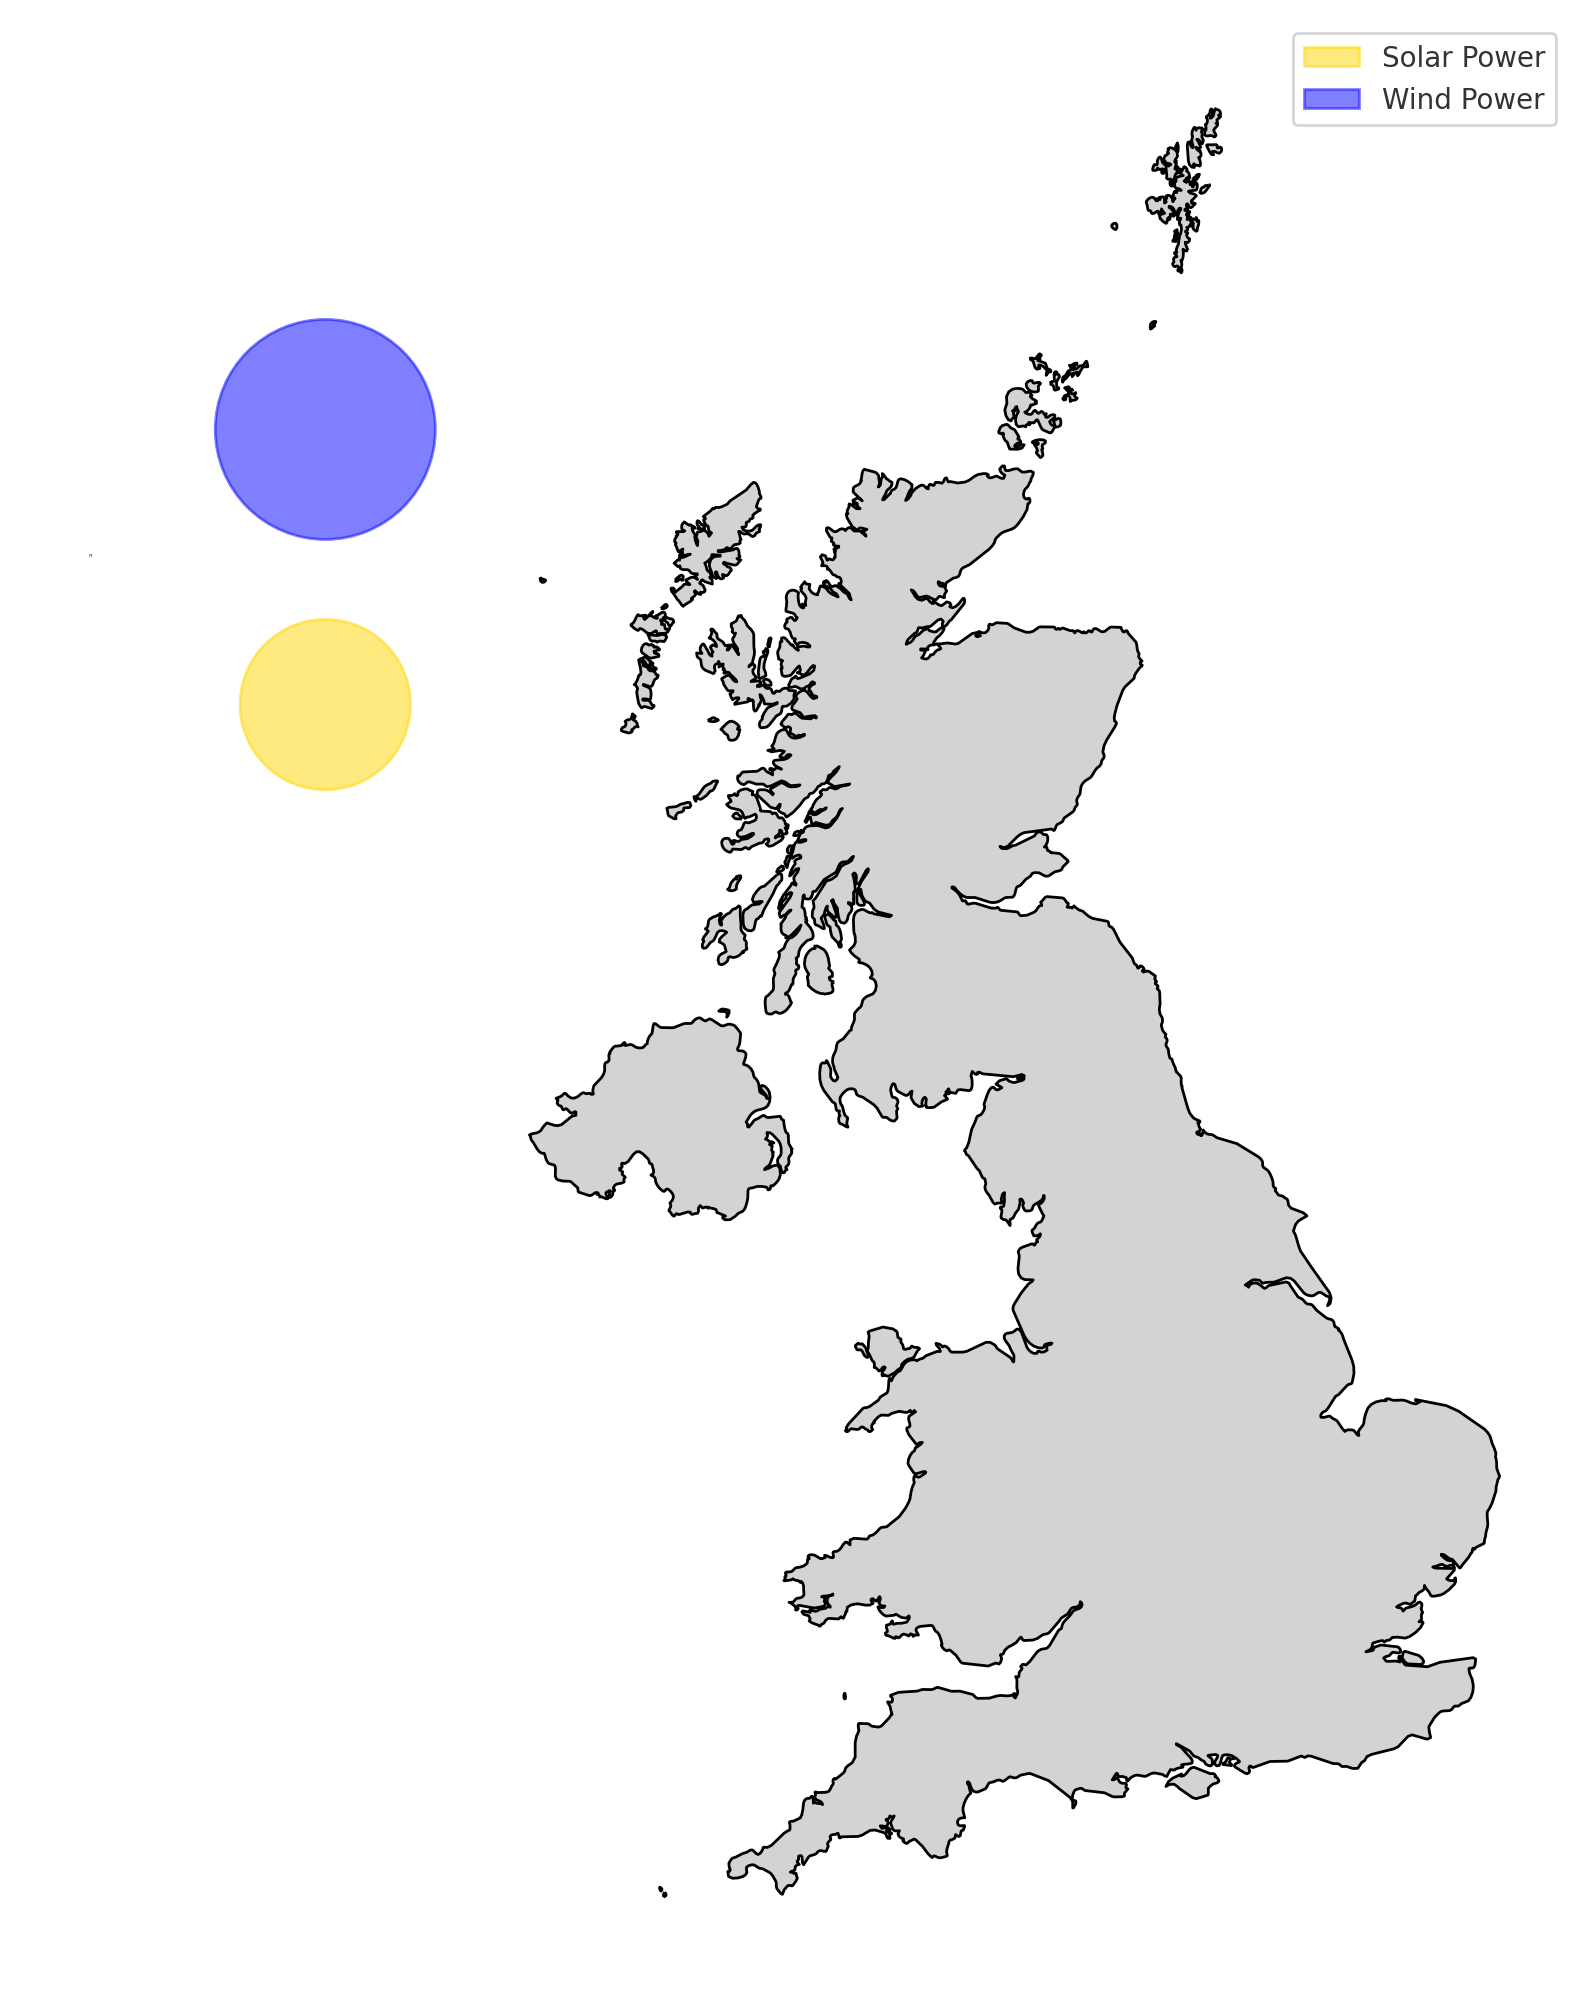 A map of the UK with the space ammonia aviation fuel would require superimposed on top.